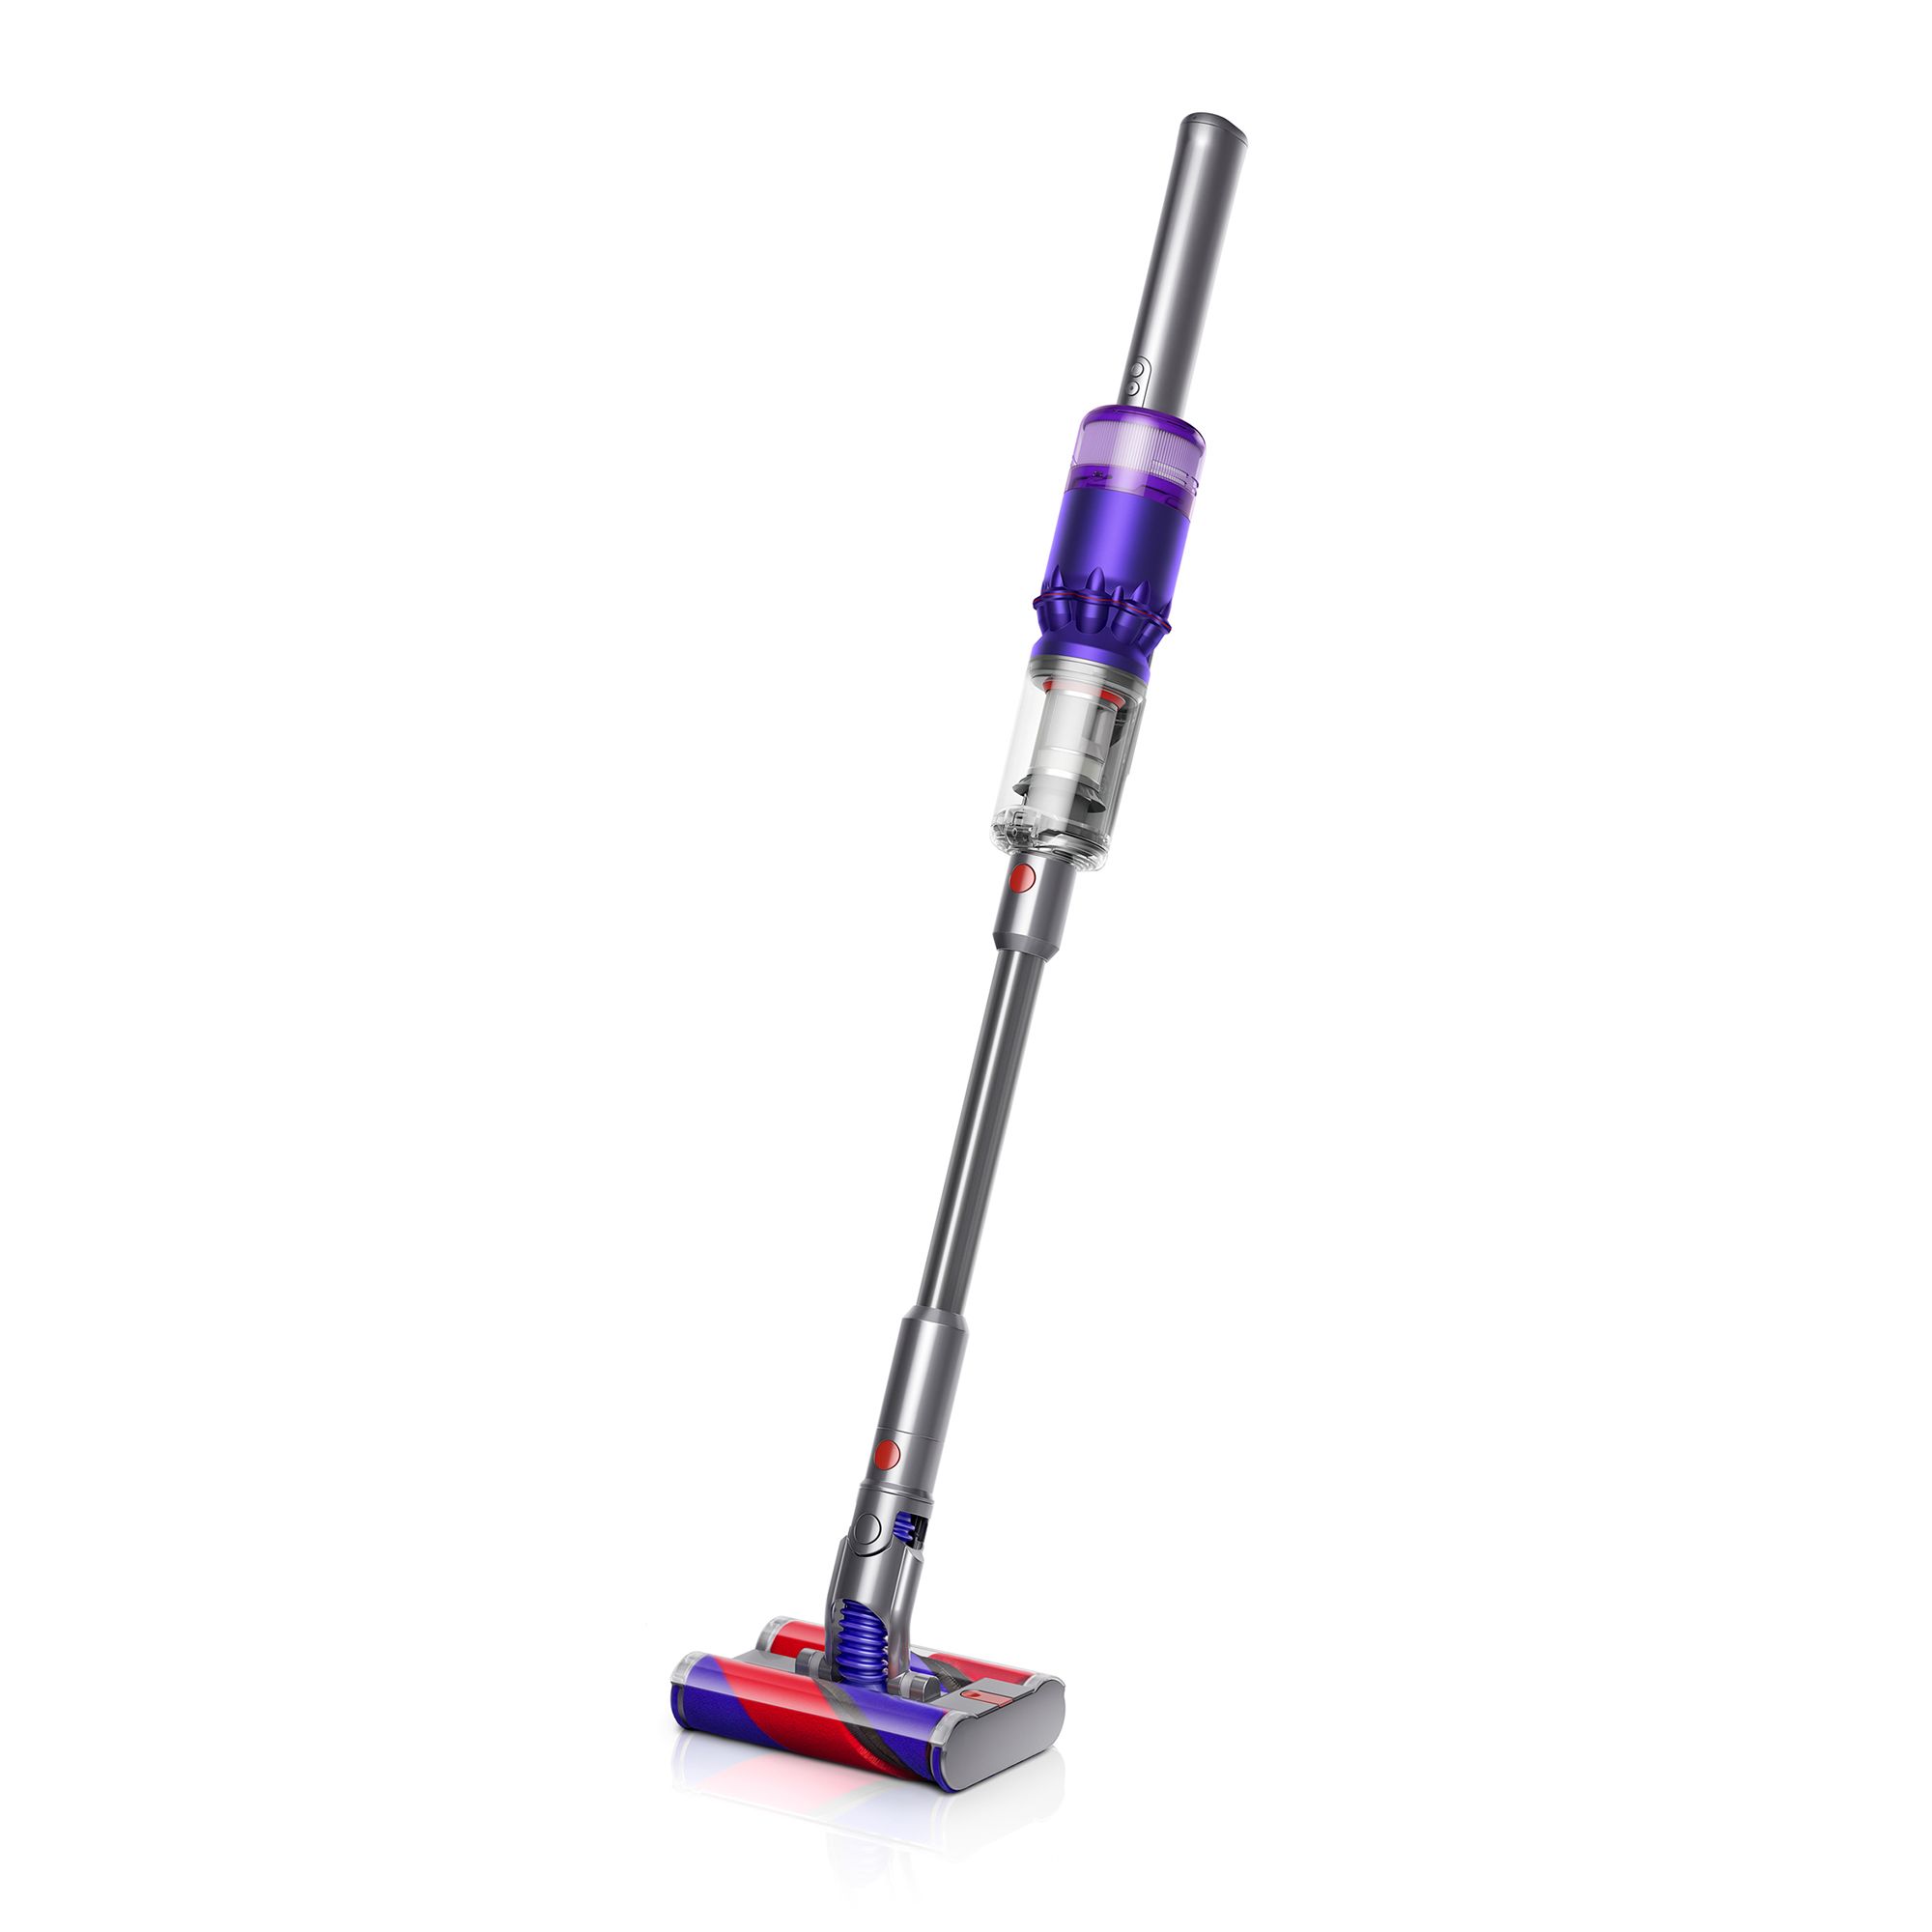 The Best 8 Dyson Vacuums In 2021, What Is The Best Dyson Cordless For Hardwood Floors